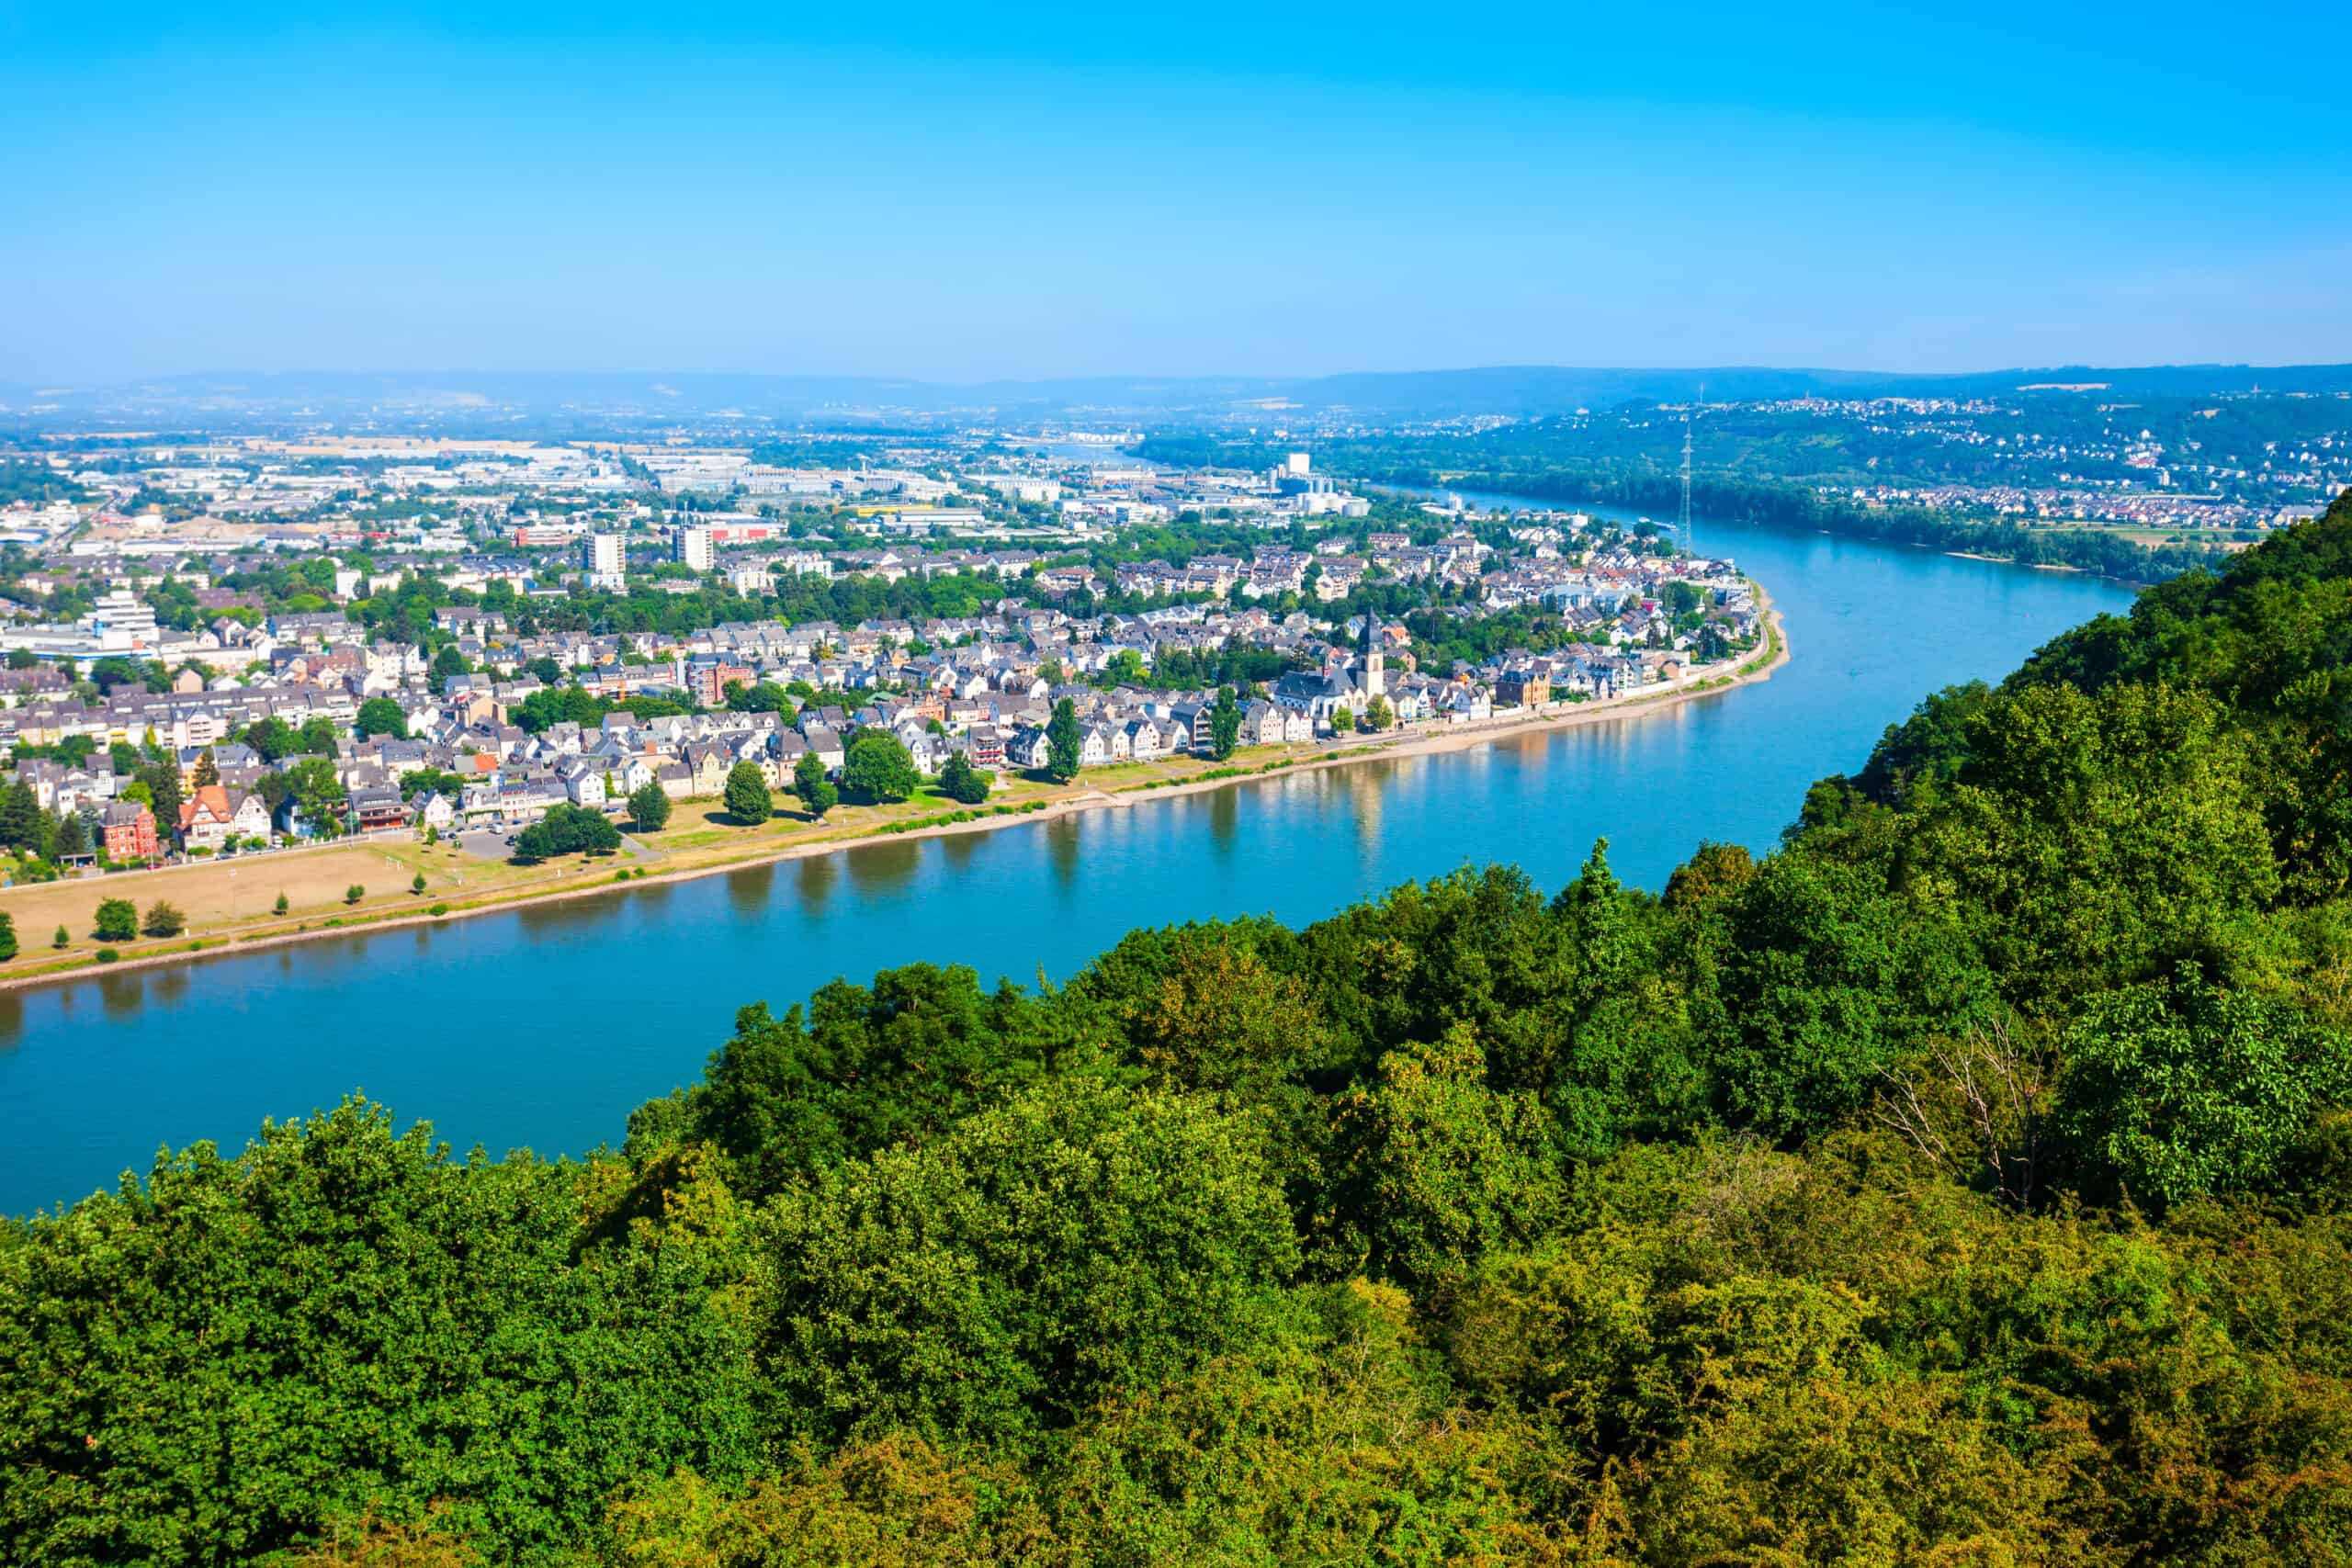 Koblenz aerial panoramic view. Koblenz is a city on the Rhine where it is joined by Moselle river.